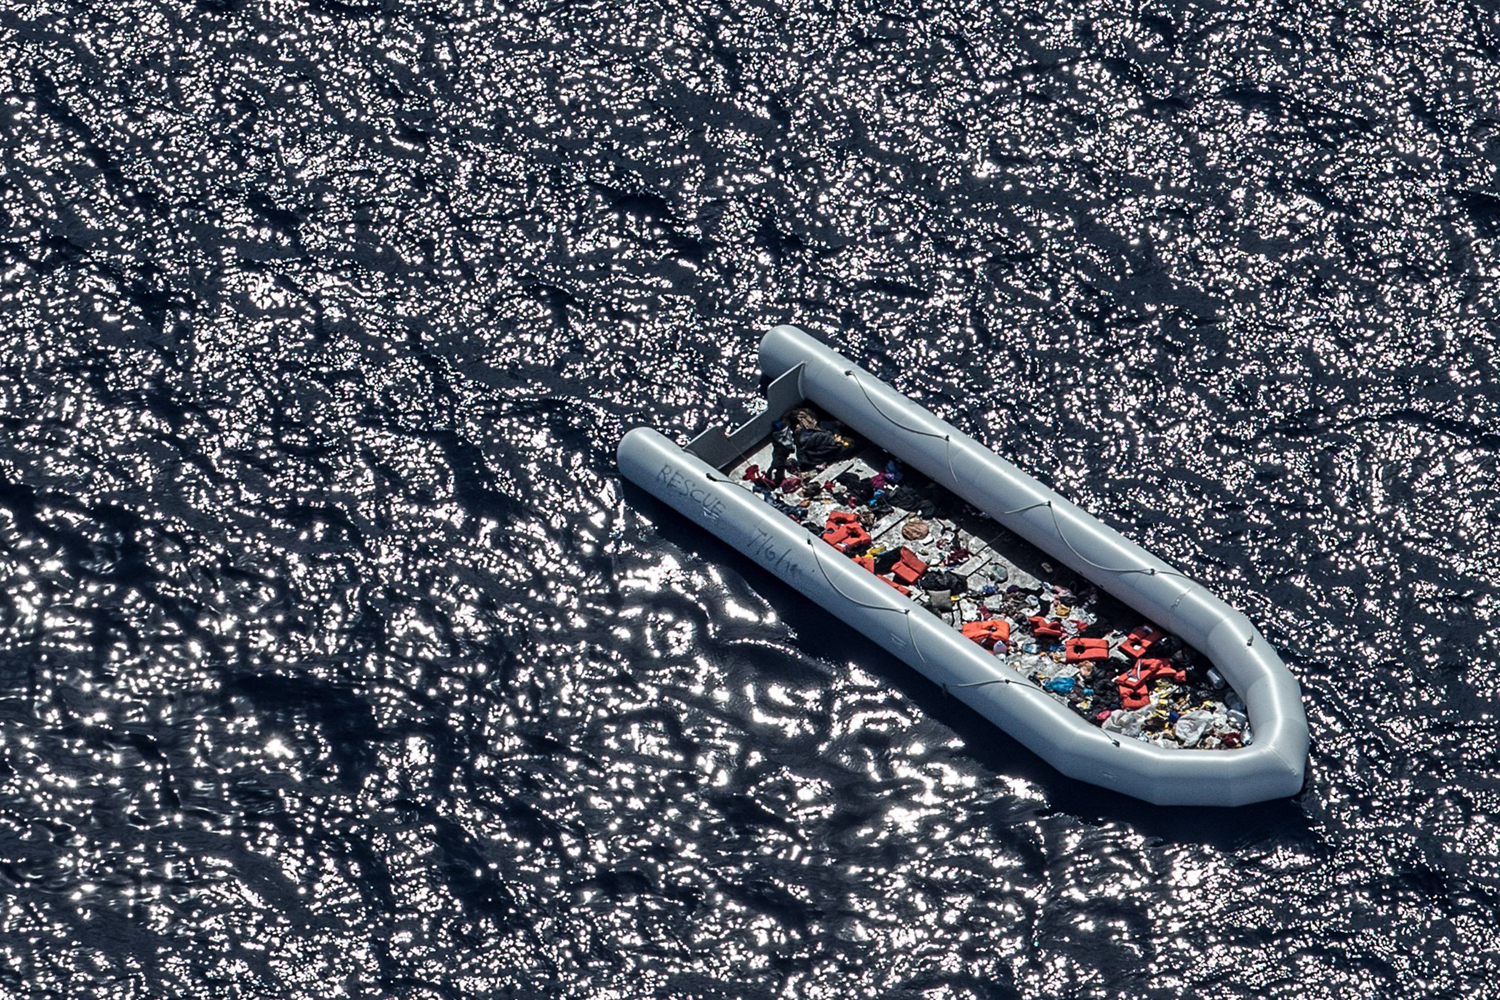 An empty dinghy with leftover lifesavers after the Italian navy rescued asylum seekers off the coast of Africa, June 7.